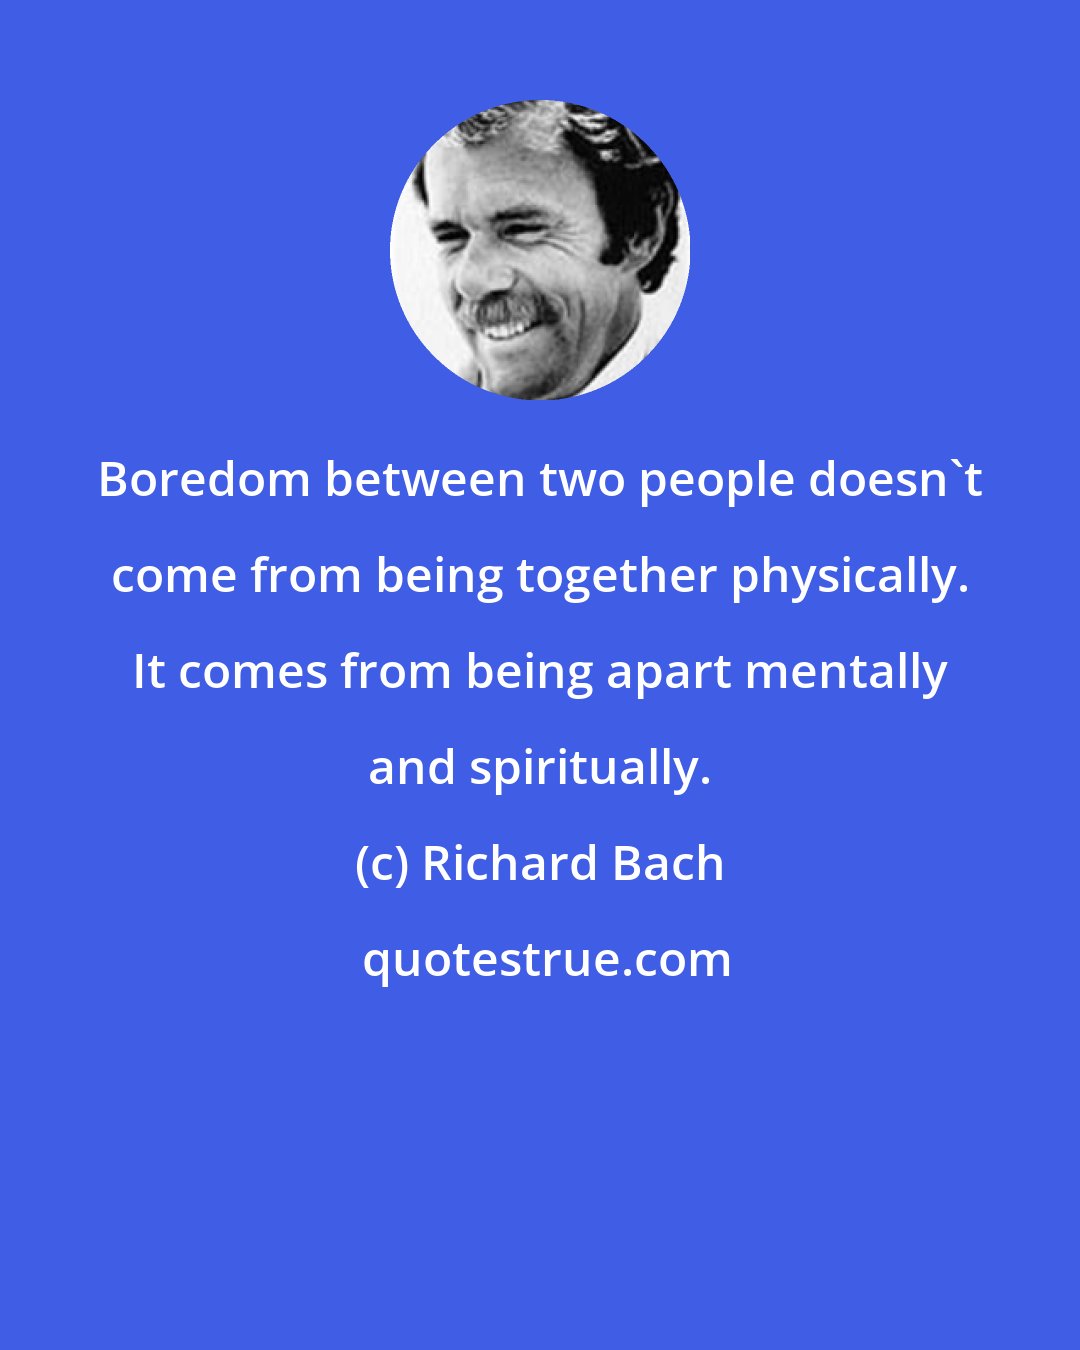 Richard Bach: Boredom between two people doesn't come from being together physically. It comes from being apart mentally and spiritually.